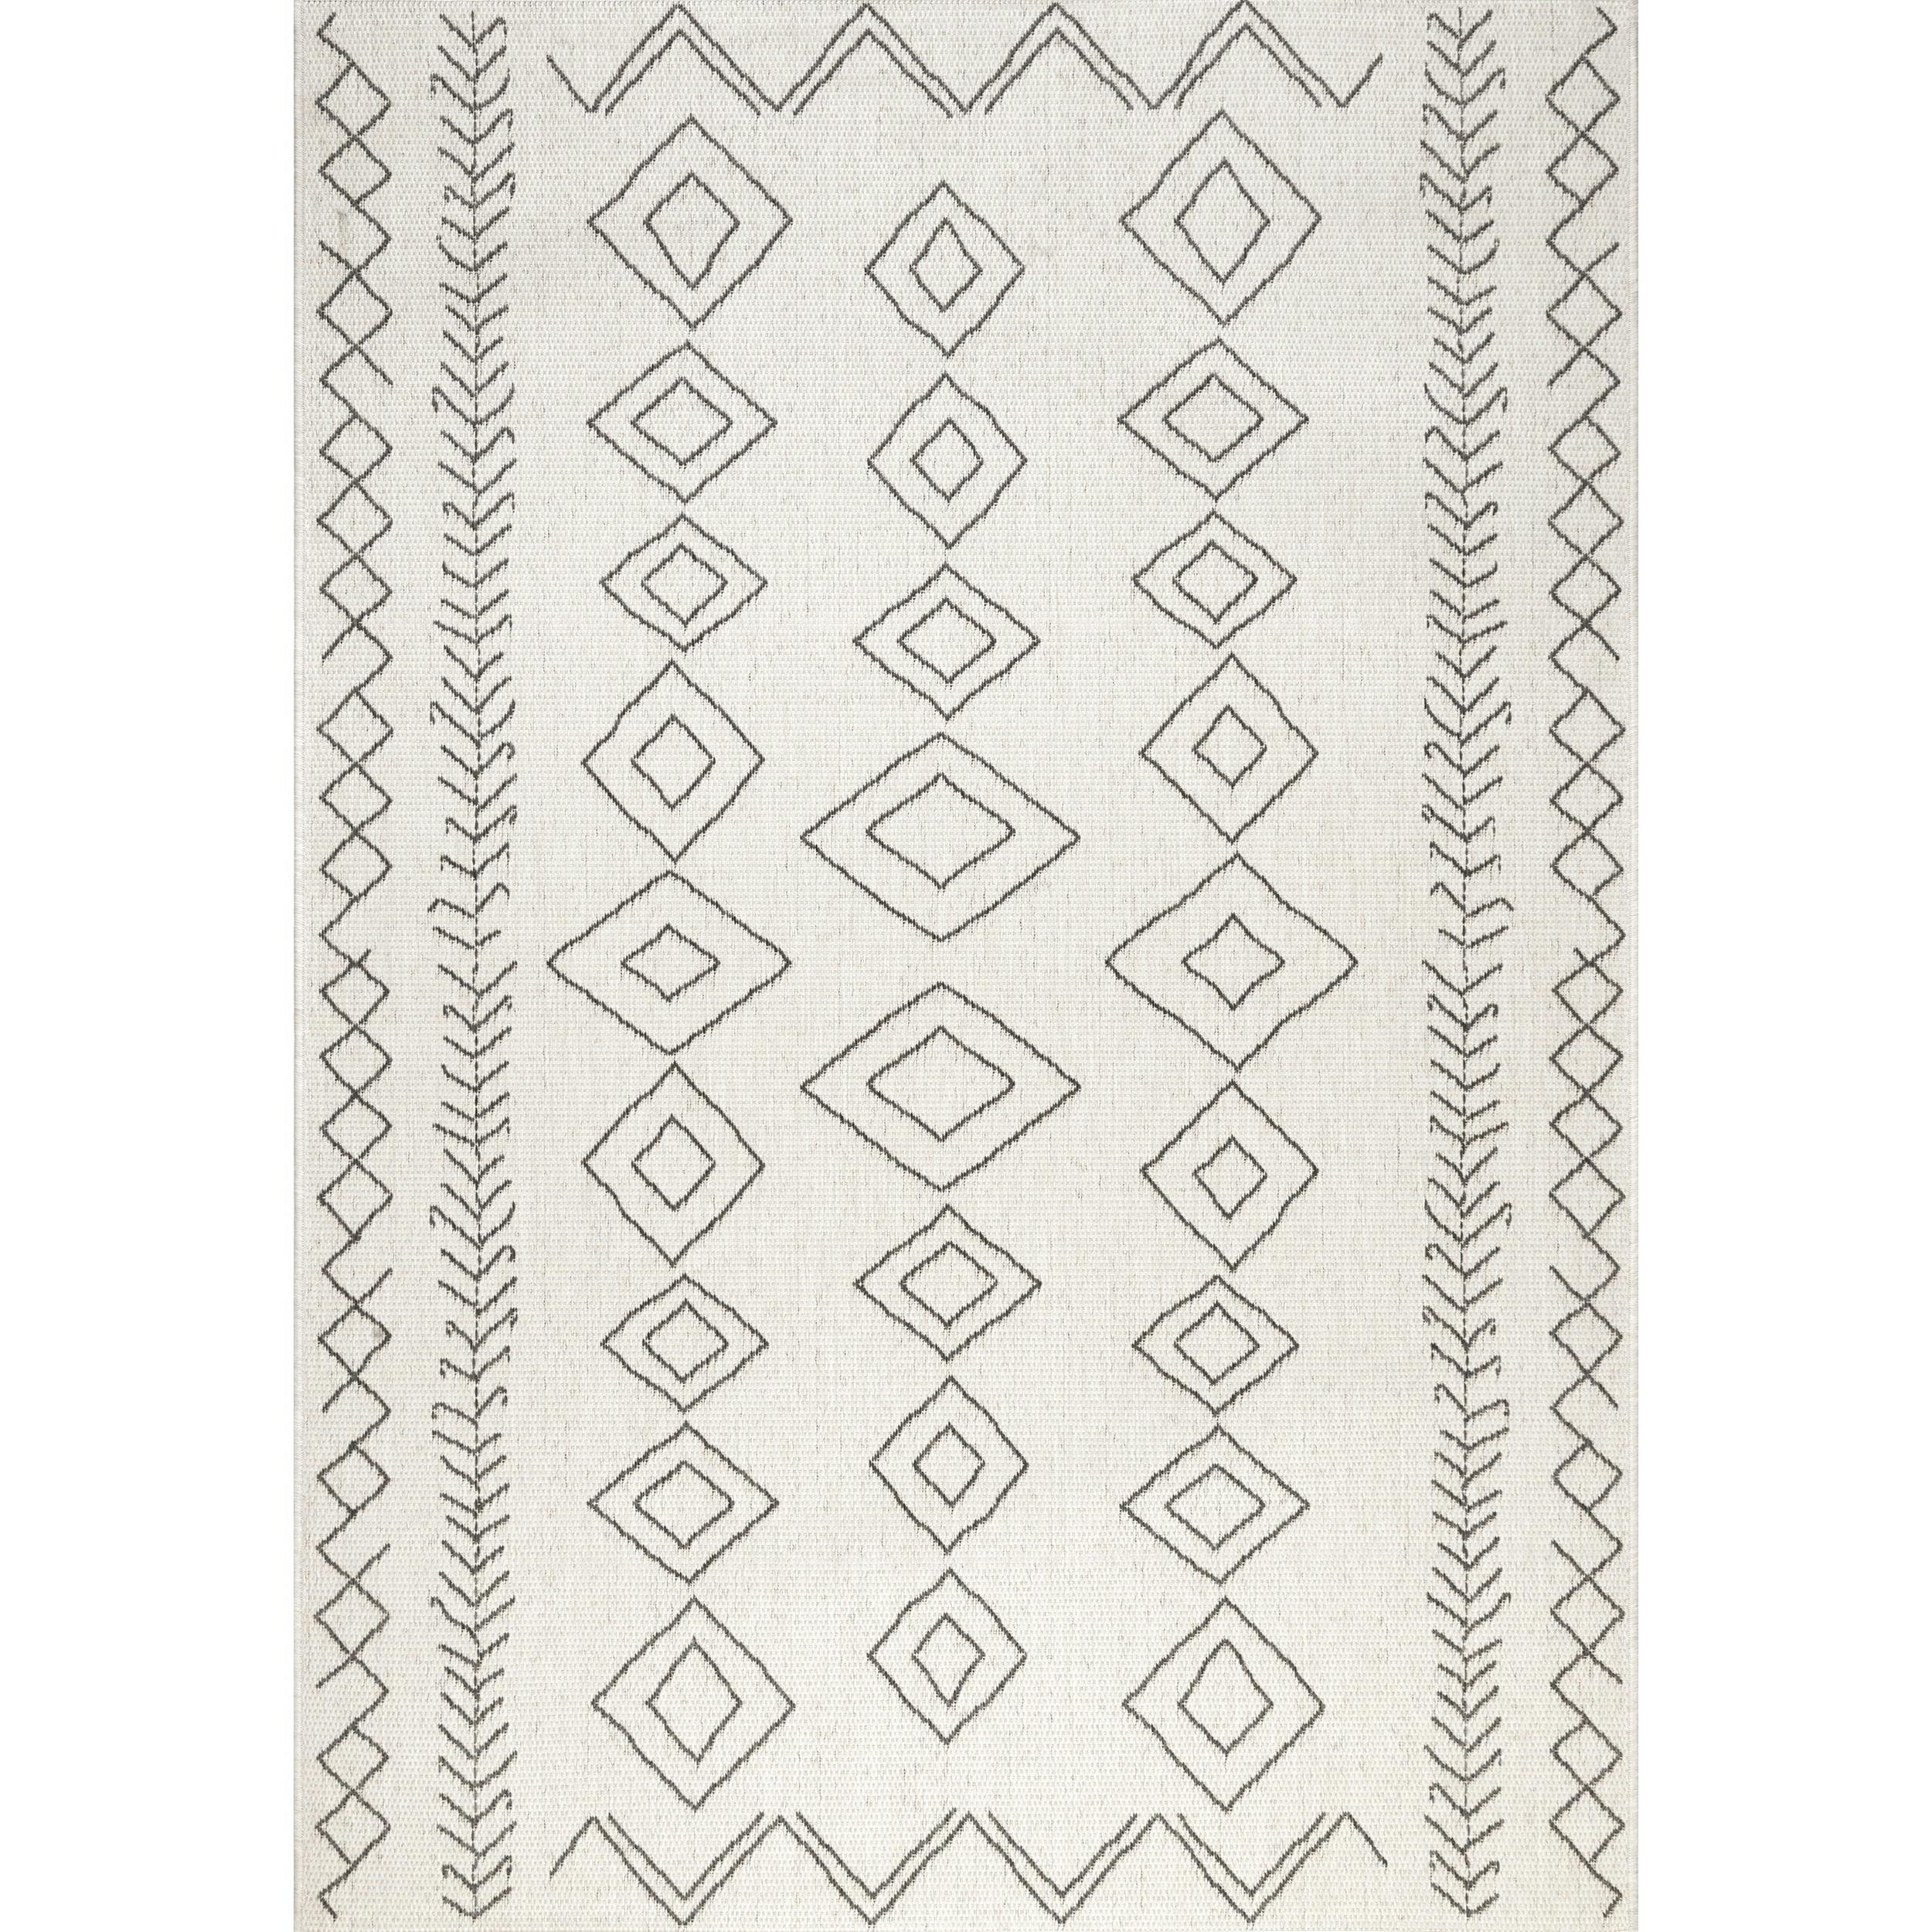 Reversible Ivory Moroccan Spot Rectangular Area Rug - 29x4 Inches